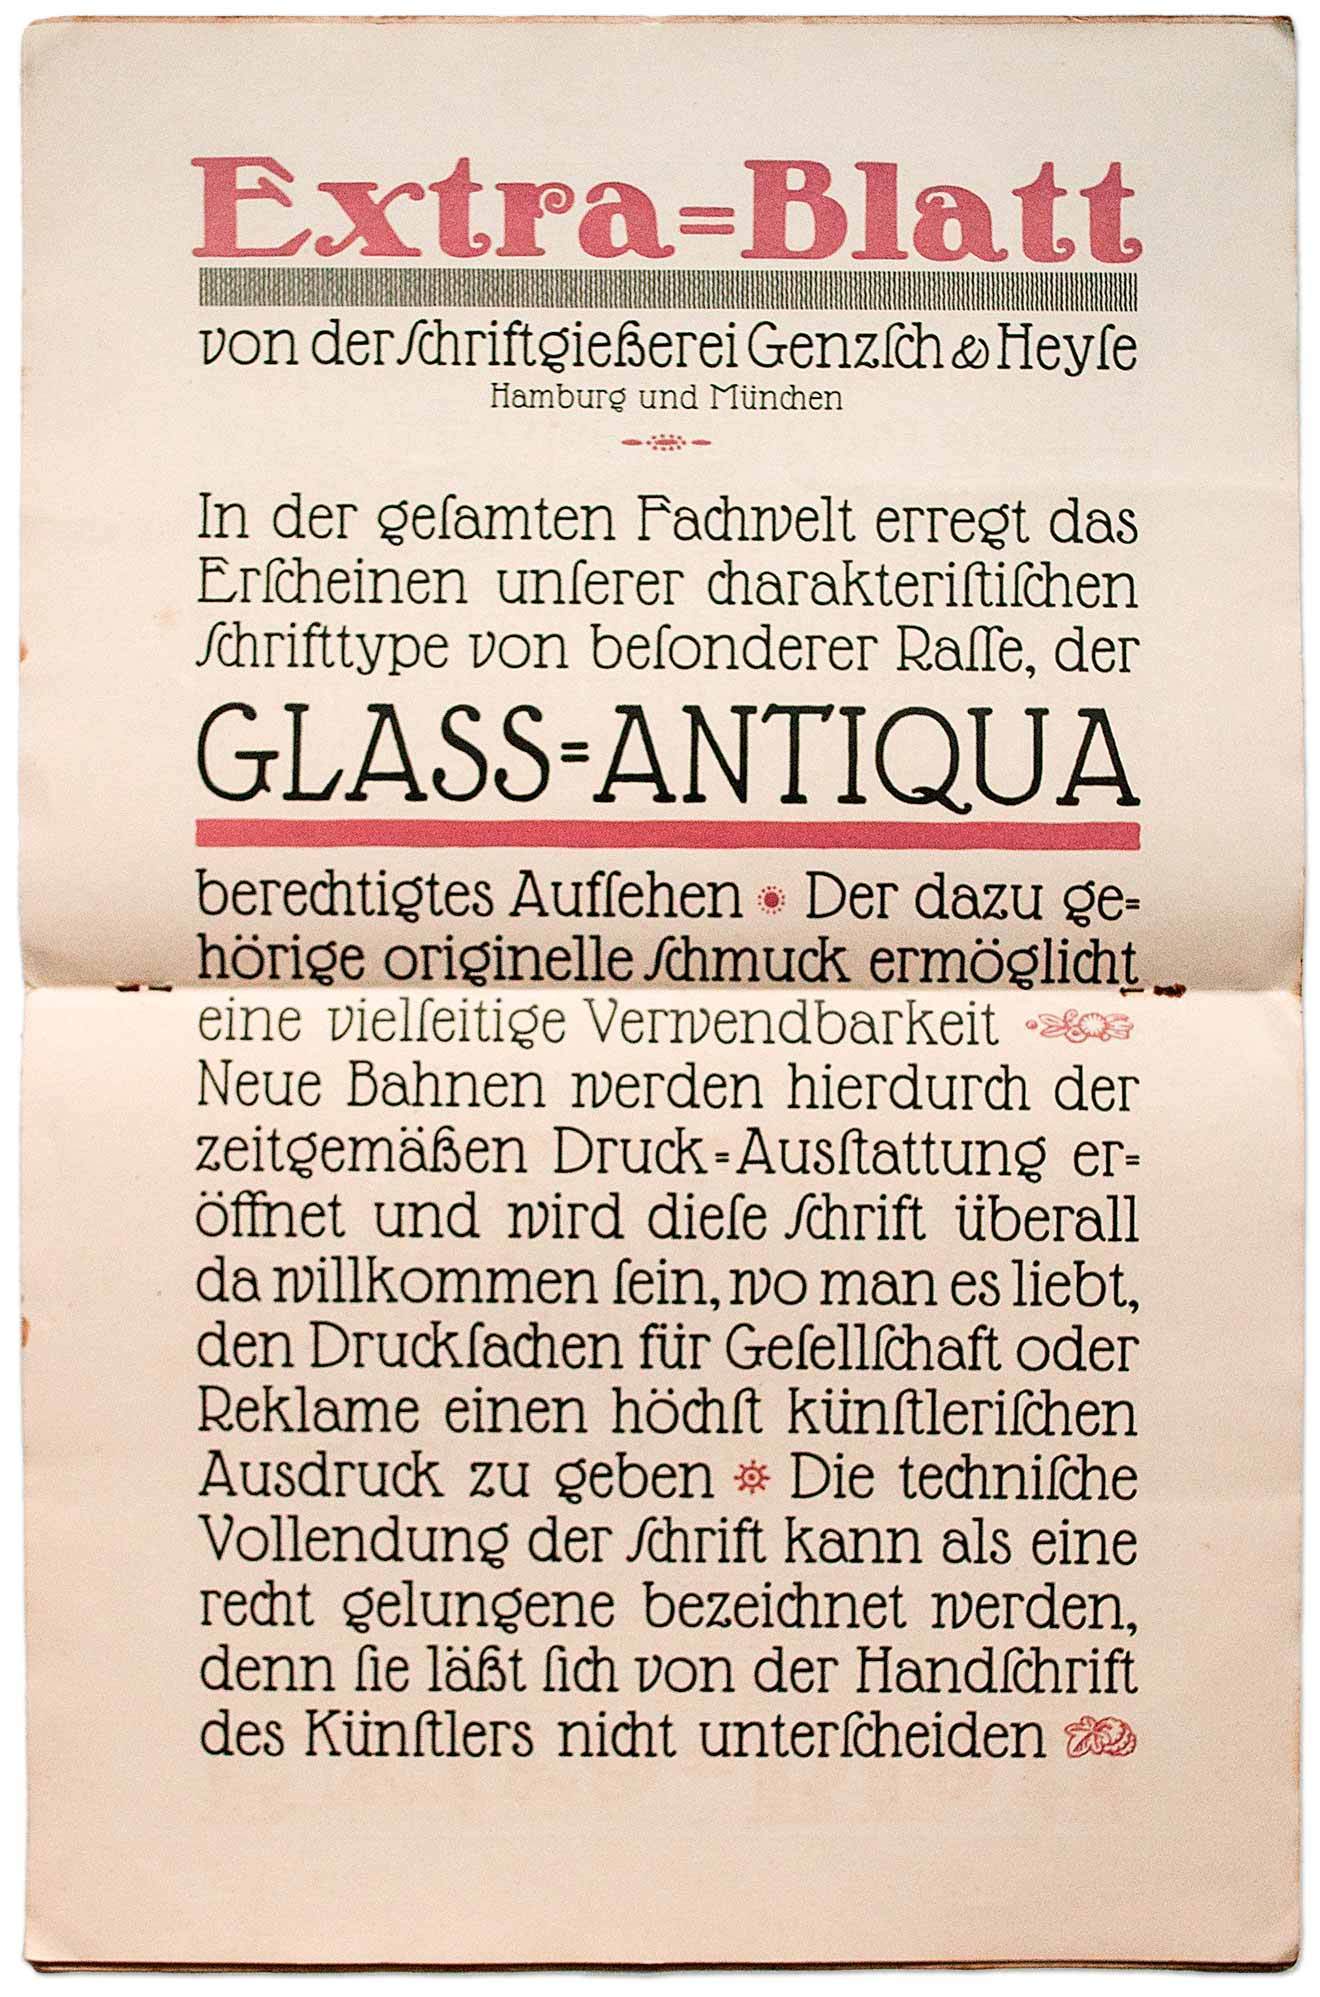 Glass Antiqua, released by Genzsch & Heyse in 1912, describes a new typewriter-like (but proportional) trend: light slab serifs with round stroke endings. Note the alternative capital ‘S’ when seen in combination with ‘ch’ at the beginning of words and the peculiar German lowercase ‘w’. (With kind permission from the collection of Erik Spiekermann.)